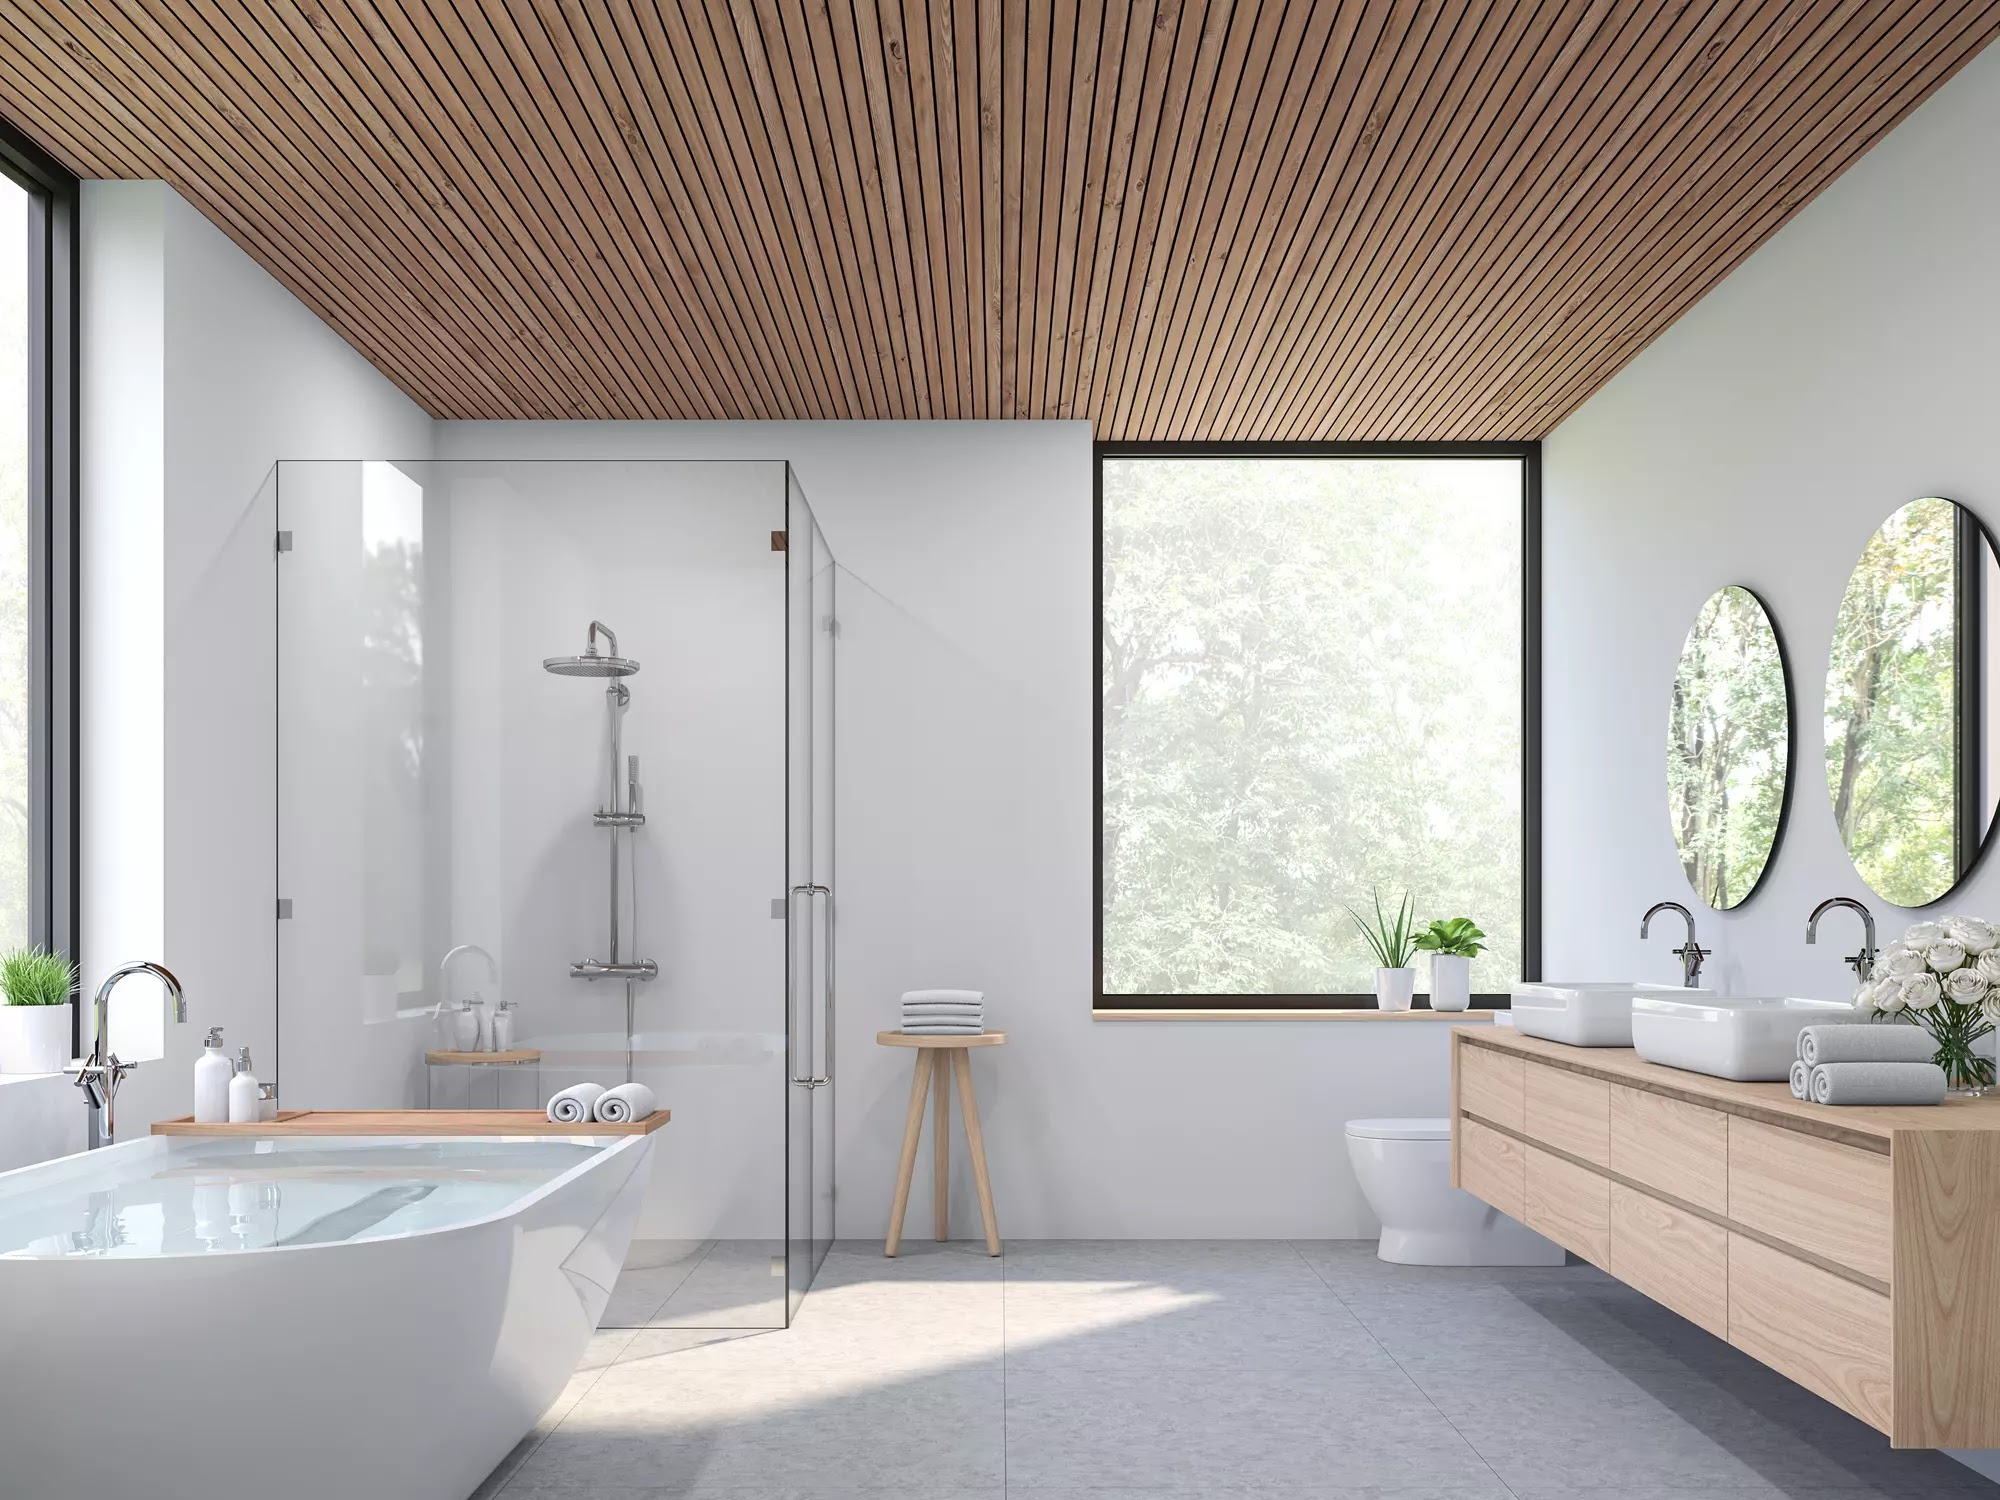 Gearing Up For A New Bathroom Design? Hiring A General Contracting Company